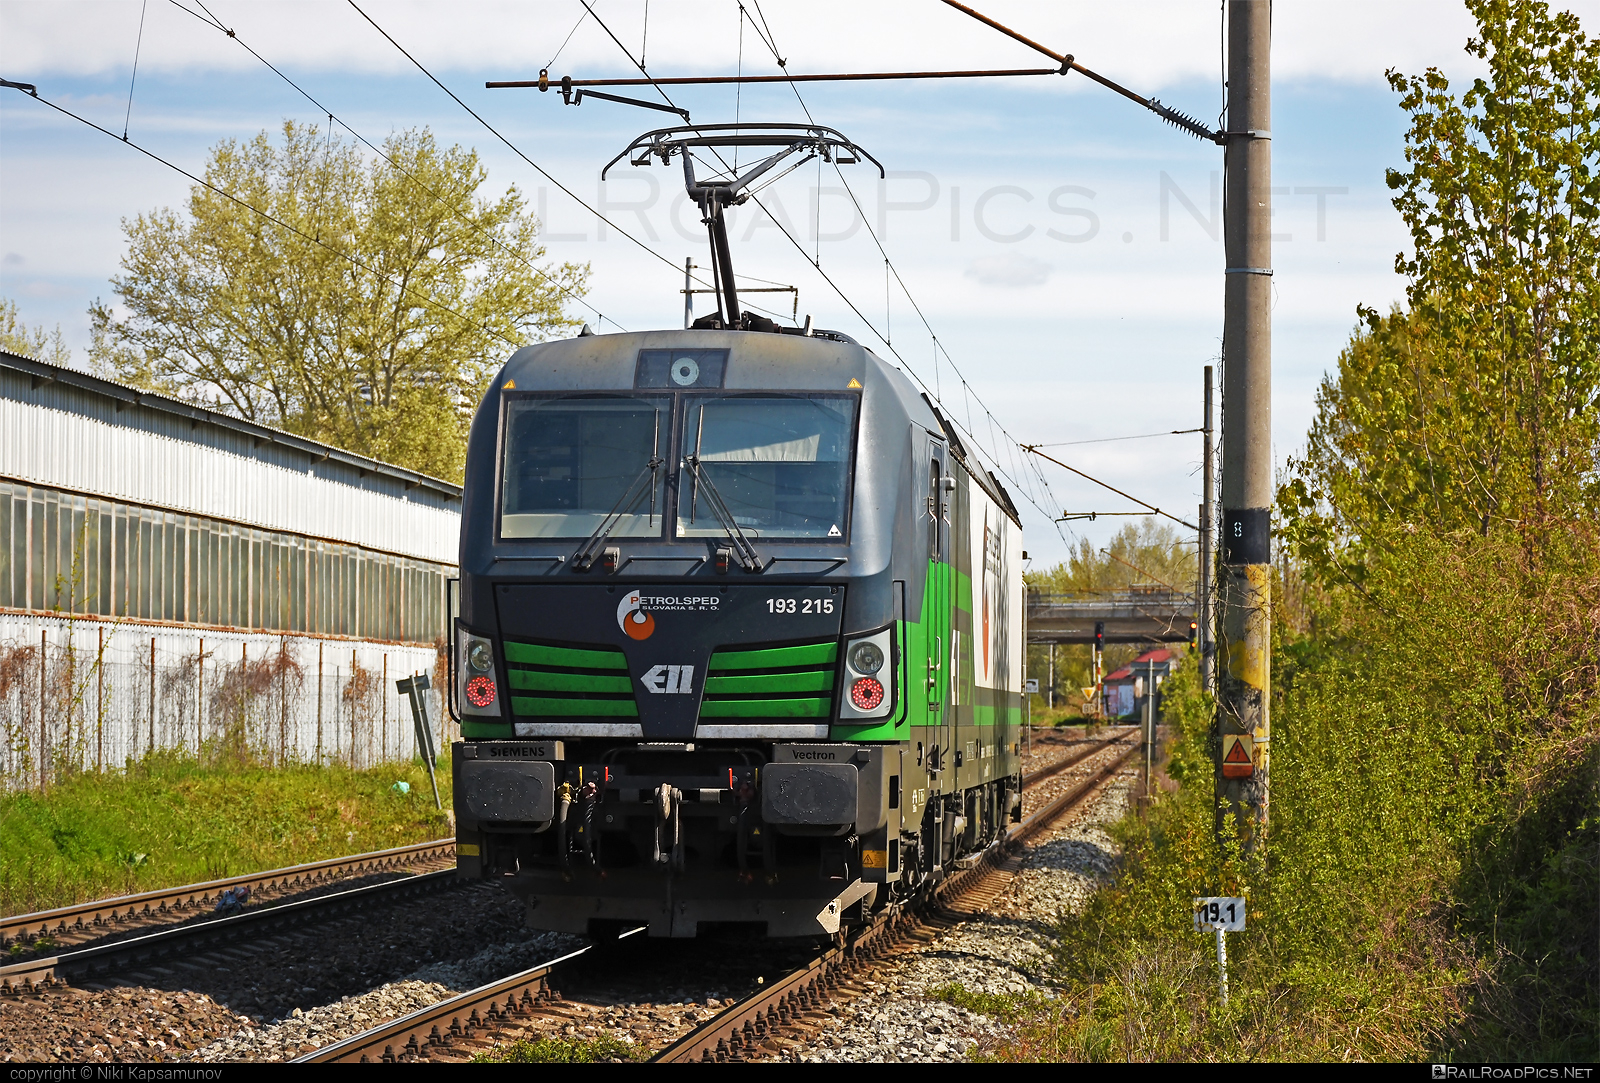 Siemens Vectron MS - 193 215 operated by PETROLSPED Slovakia s.r.o. #ell #ellgermany #eloc #europeanlocomotiveleasing #petrolsped #petrolspedSlovakia #petrolspedSlovakiaSro #railLog #railLogSro #siemens #siemensVectron #siemensVectronMS #vectron #vectronMS